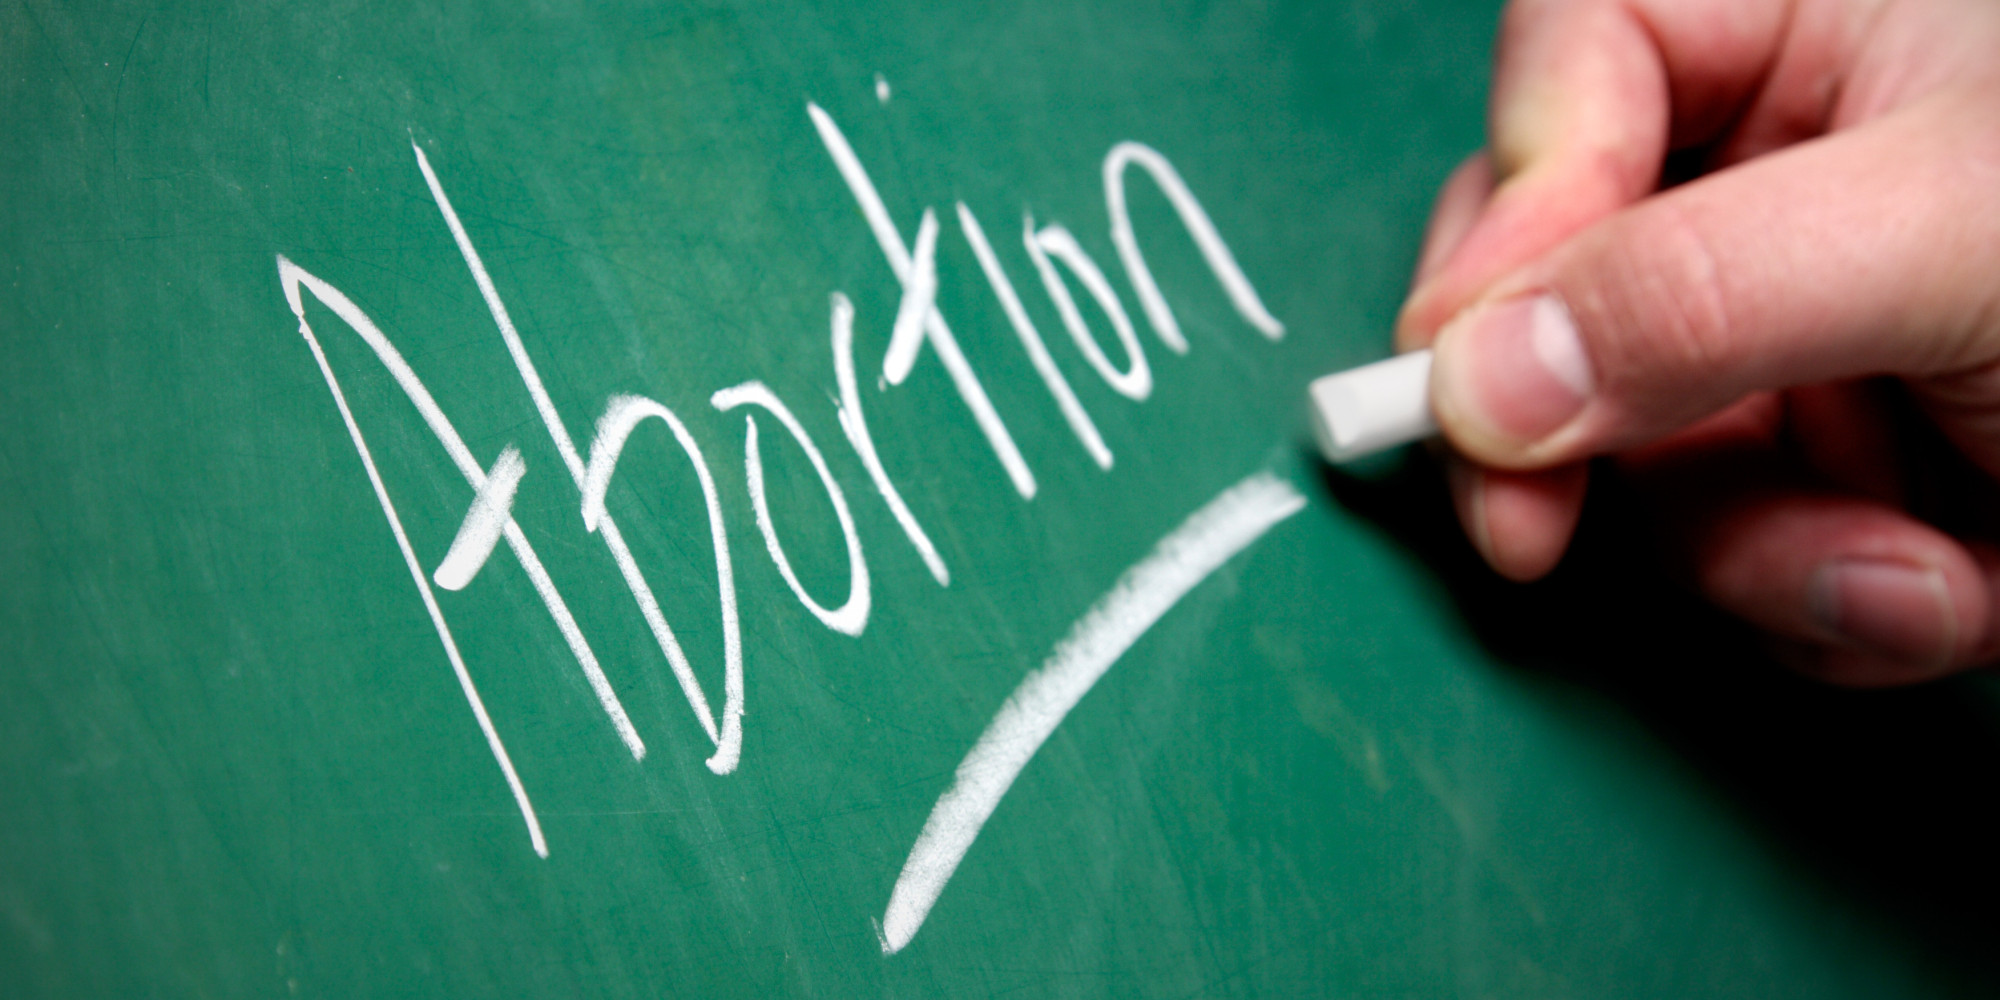 6 Things To Understand When Talking About Abortion HuffPost